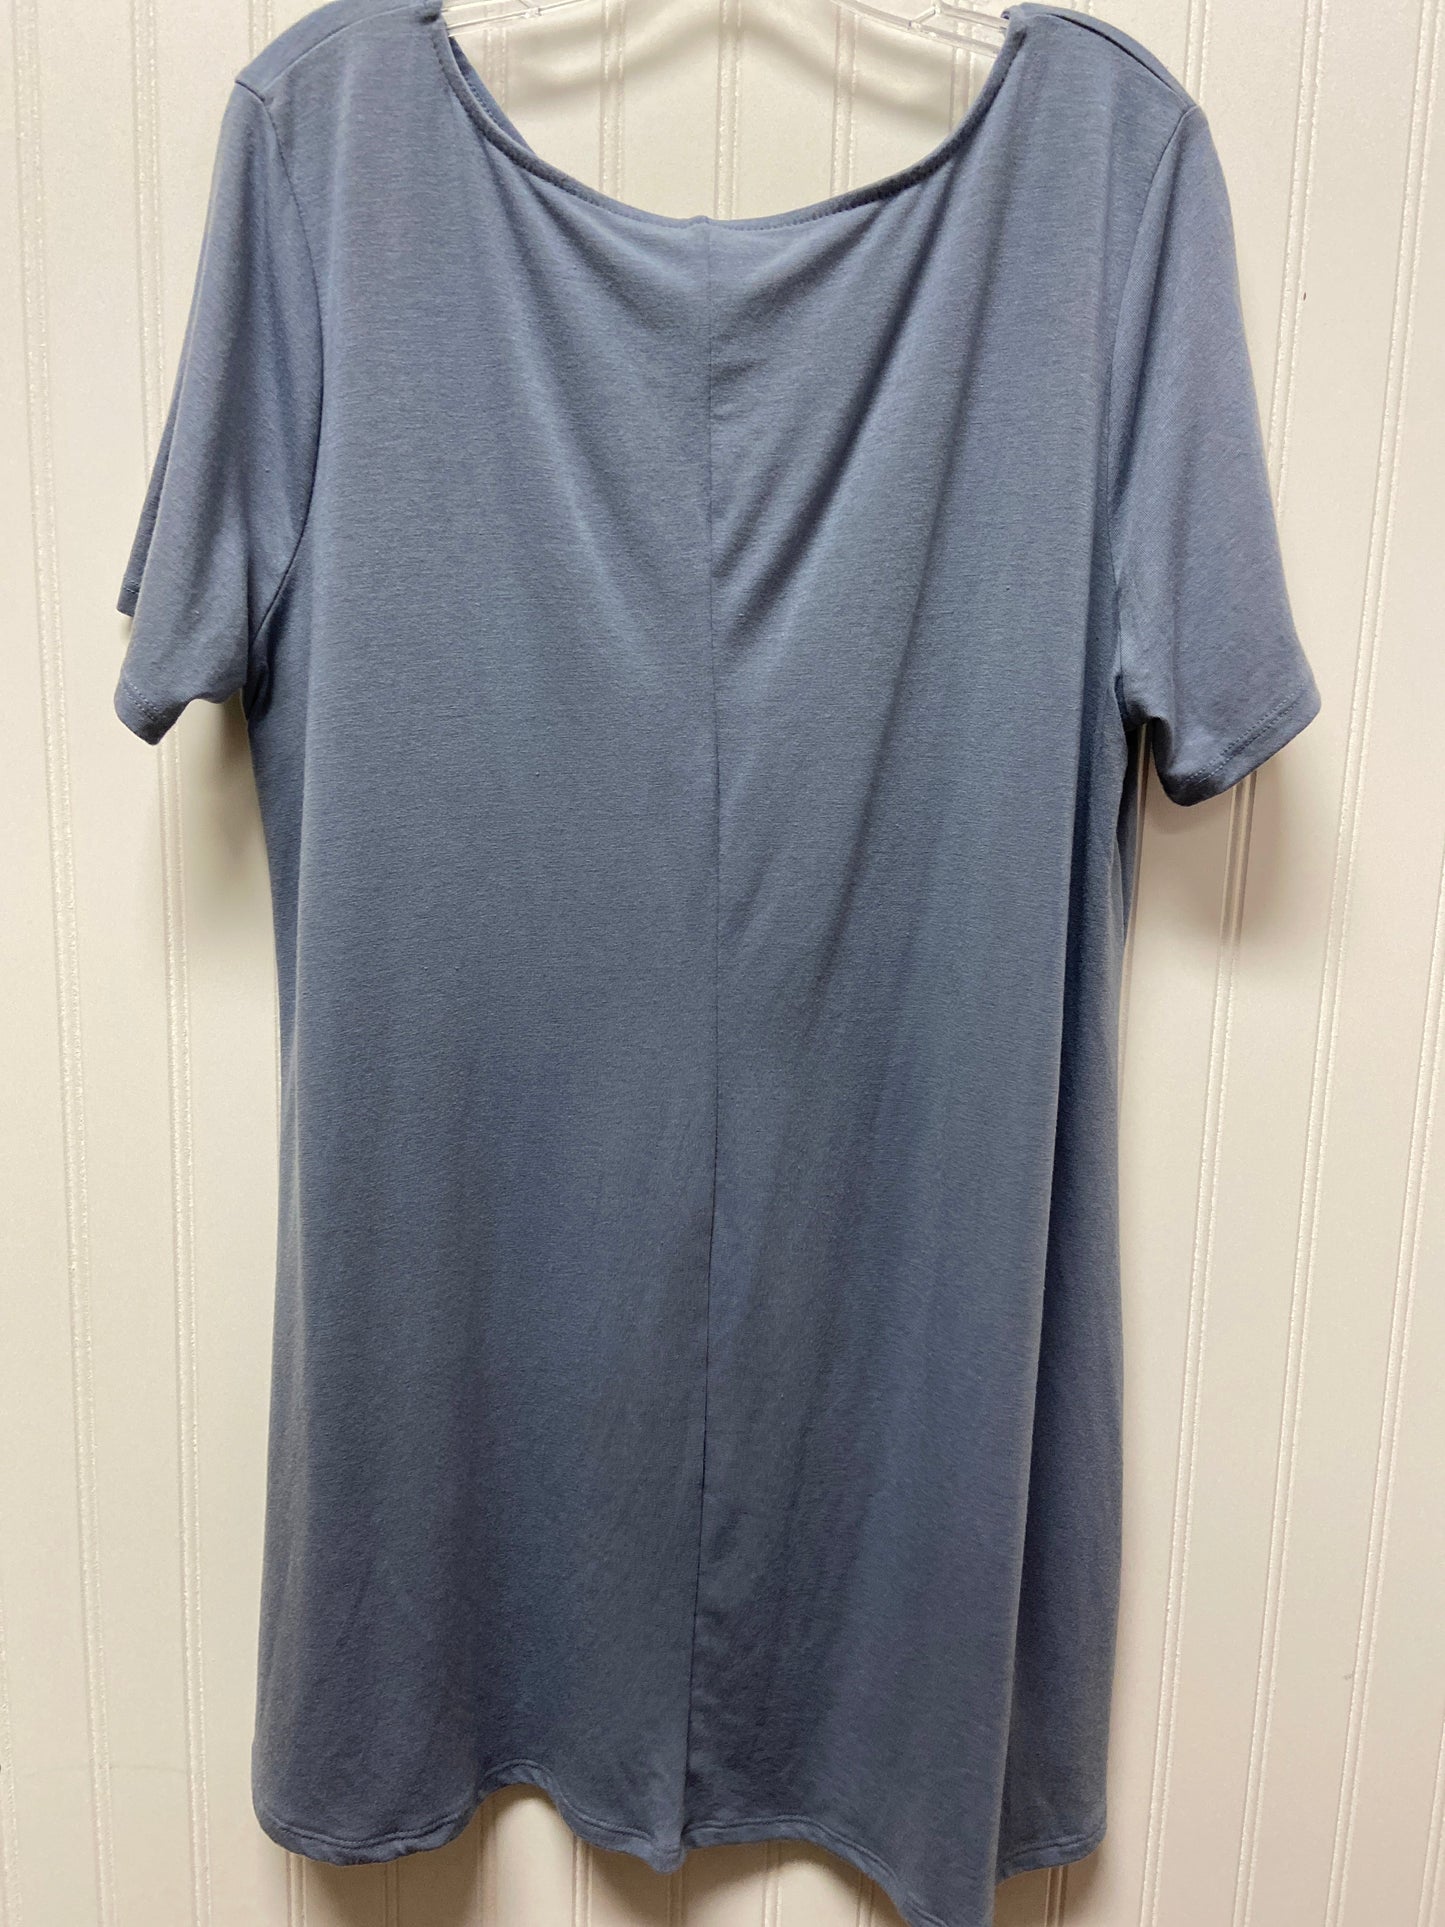 Blue Top Short Sleeve Basic Zenana Outfitters, Size 2x